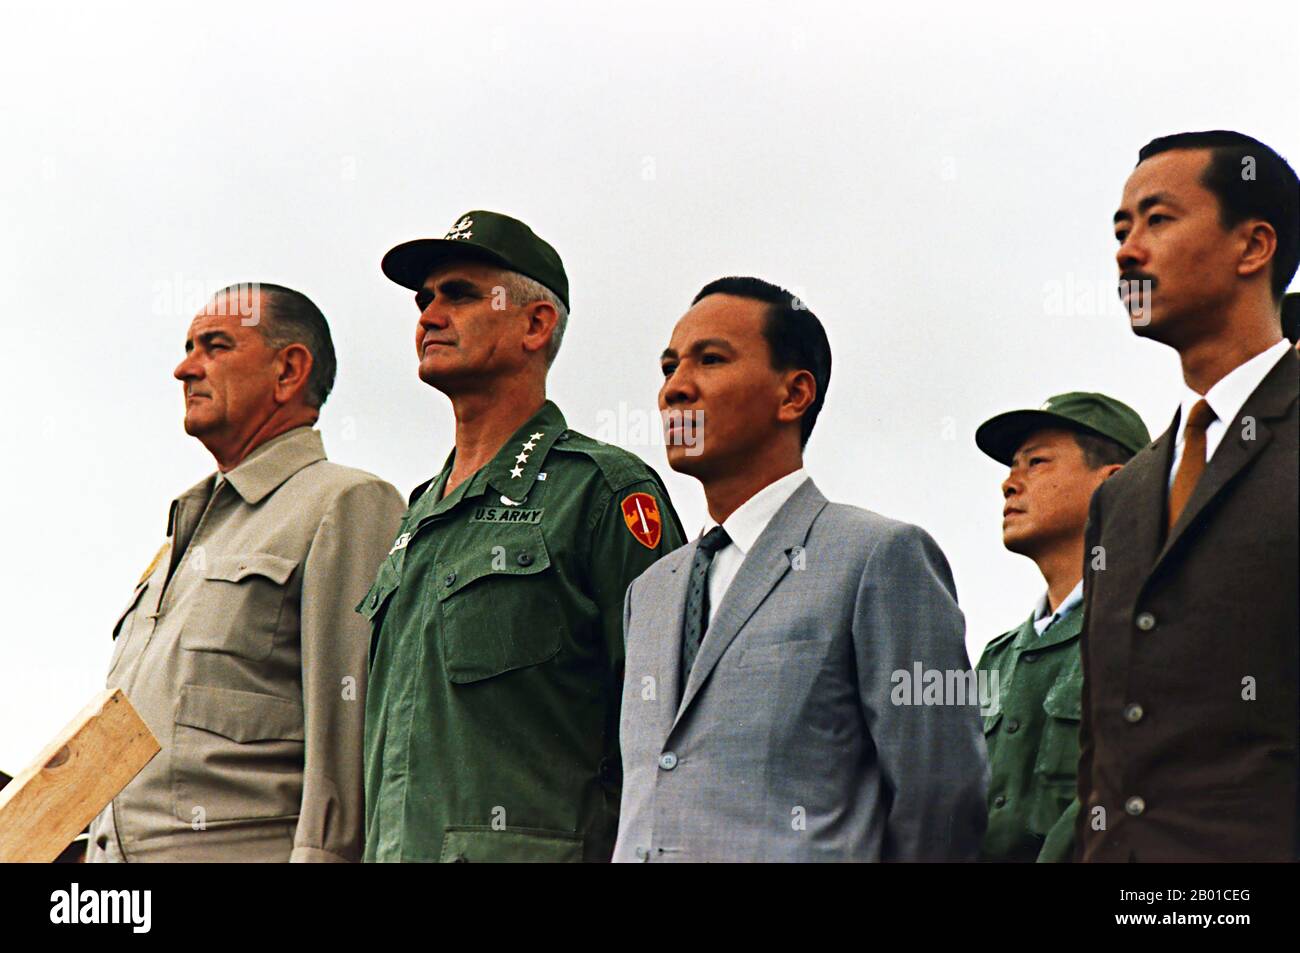 Vietnam: US President Lyndon B. Johnson and General William Westmoreland with Lieutenant General Nguyen Van Thieu and Prime Minister Nguyen Cao Ky of South Vietnam, Saigon. Photo by Yoichi Okamoto (3 July 1915 - 24 April 1985, public domain), 26 October 1966.  The Second Indochina War, known in America as the Vietnam War, was a Cold War era military conflict that occurred in Vietnam, Laos, and Cambodia from 1 November 1955 to the fall of Saigon on 30 April 1975. This war followed the First Indochina War and was fought between North Vietnam and the government of South Vietnam. Stock Photo